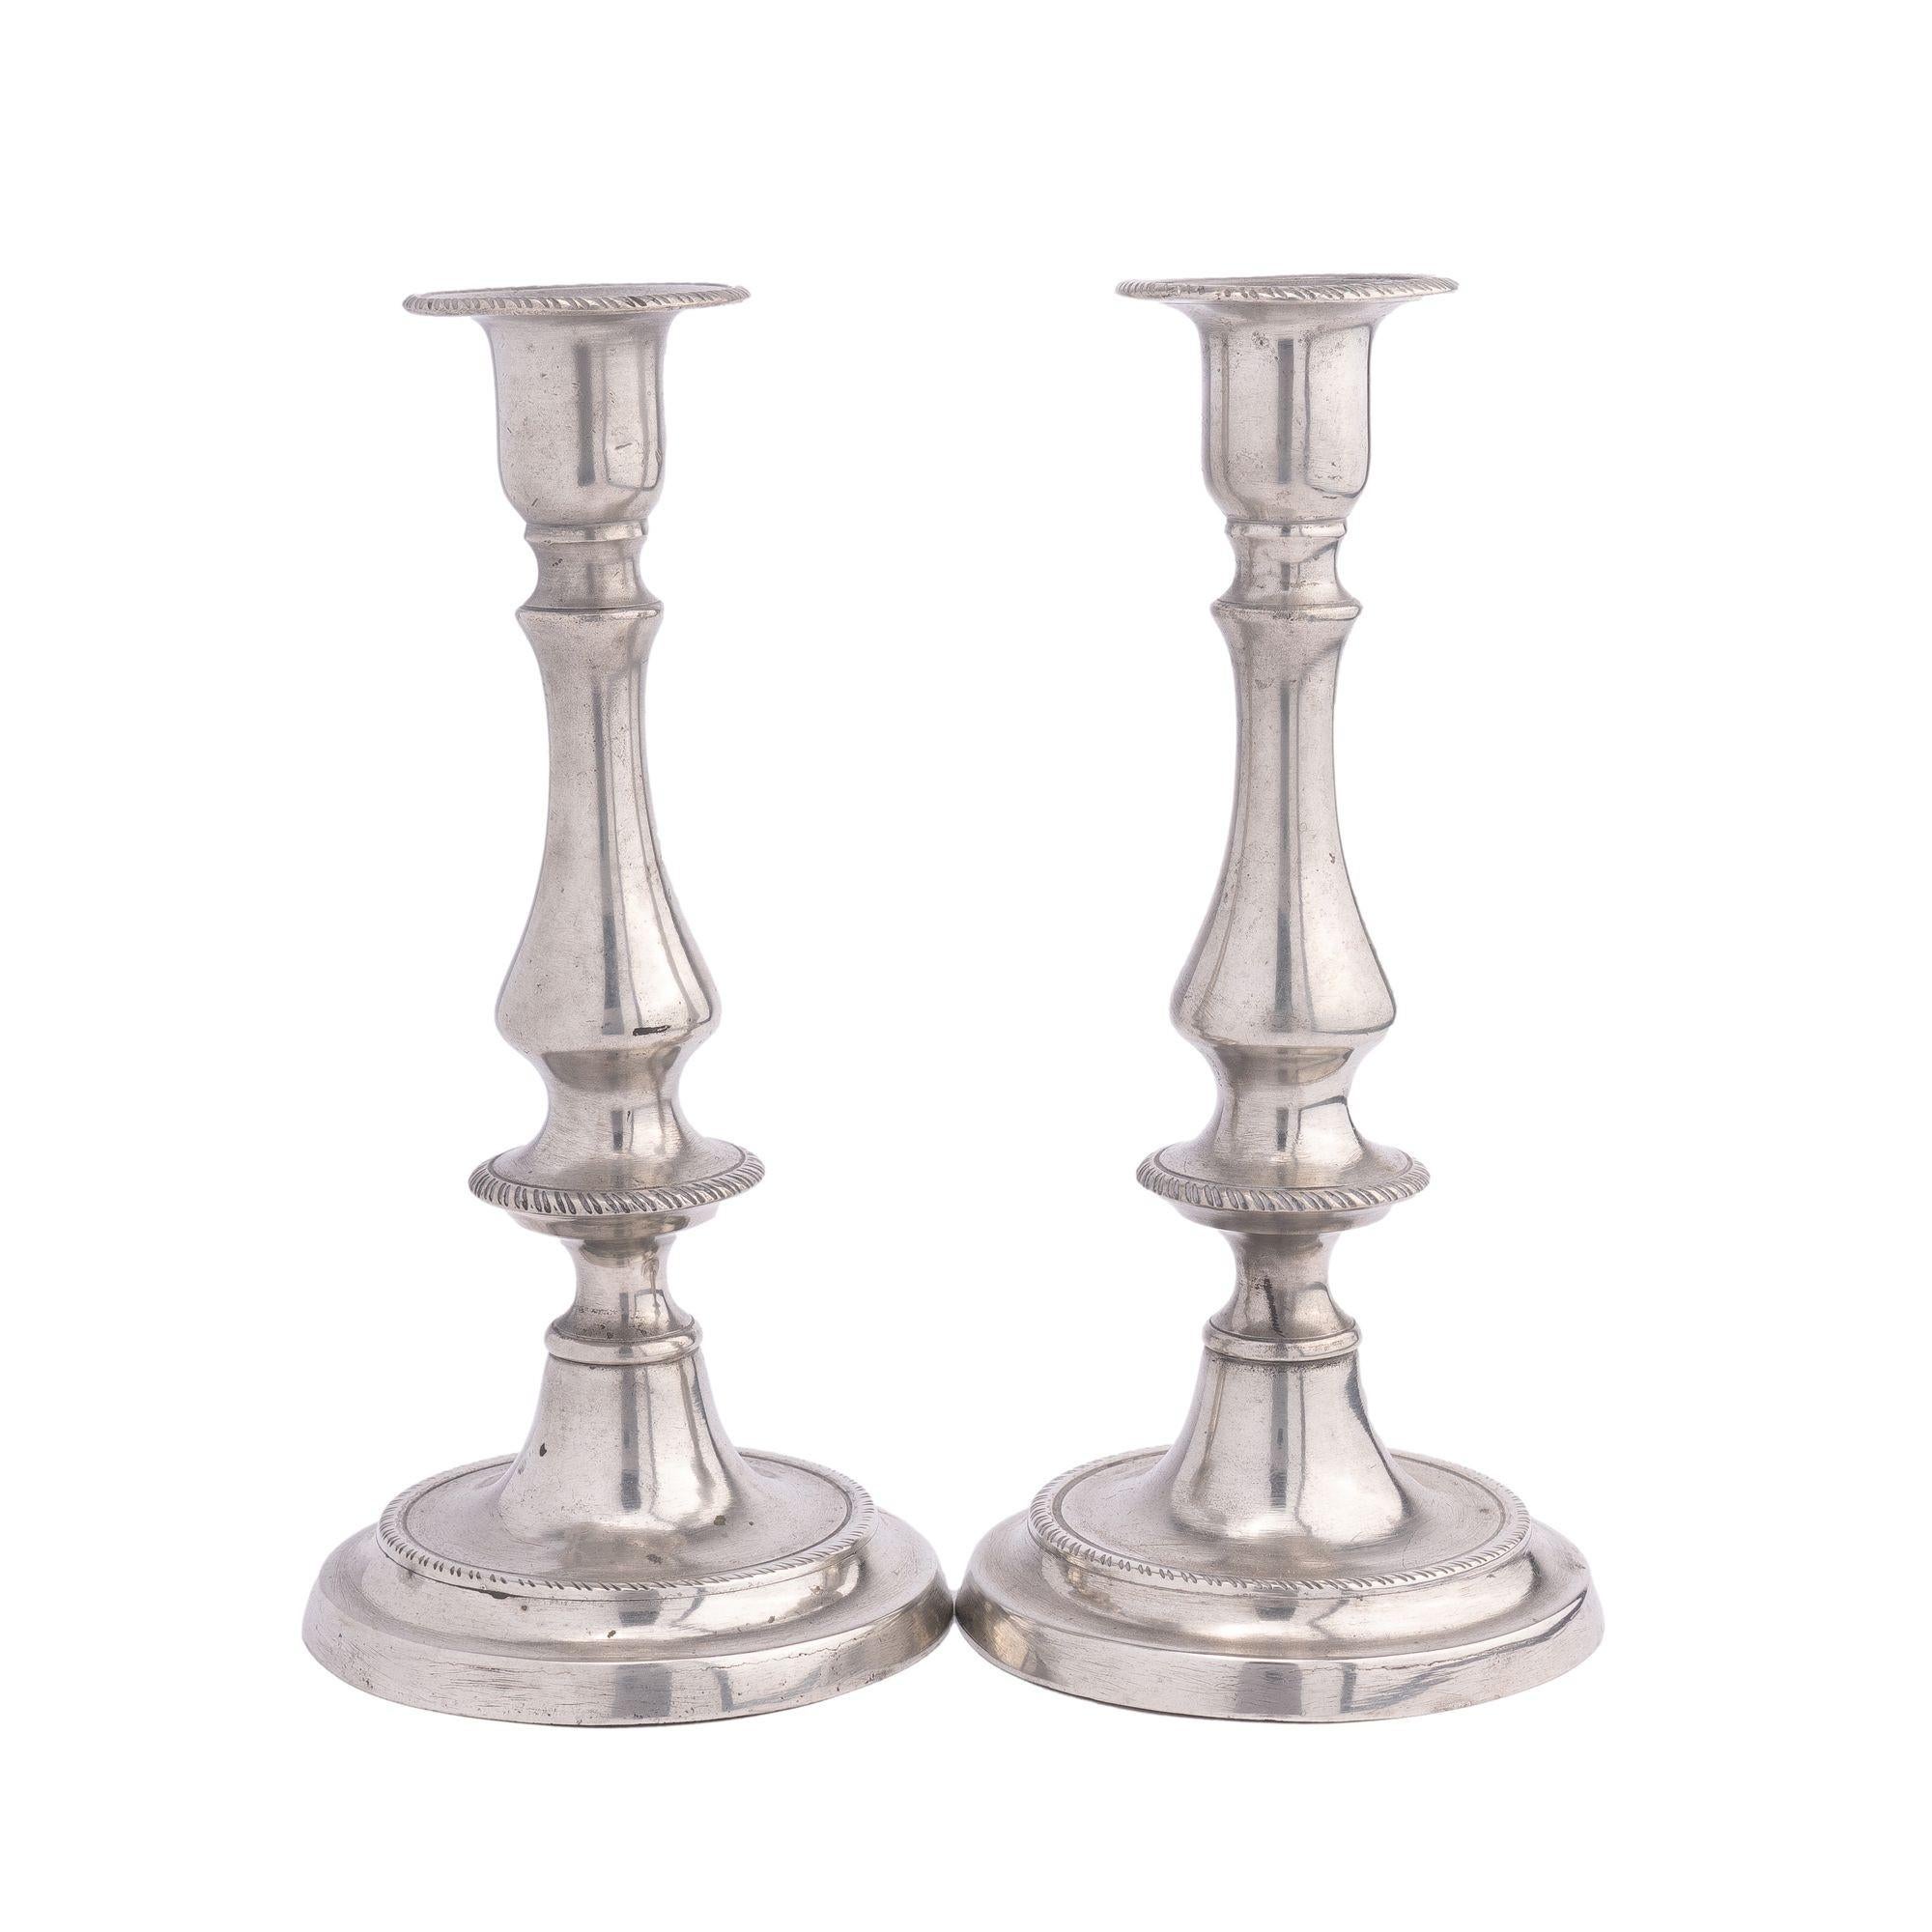 Pair of baluster form pewter candlesticks with roped edged bobesh and candle push-up ejectors.
American, circa 1820-1830.